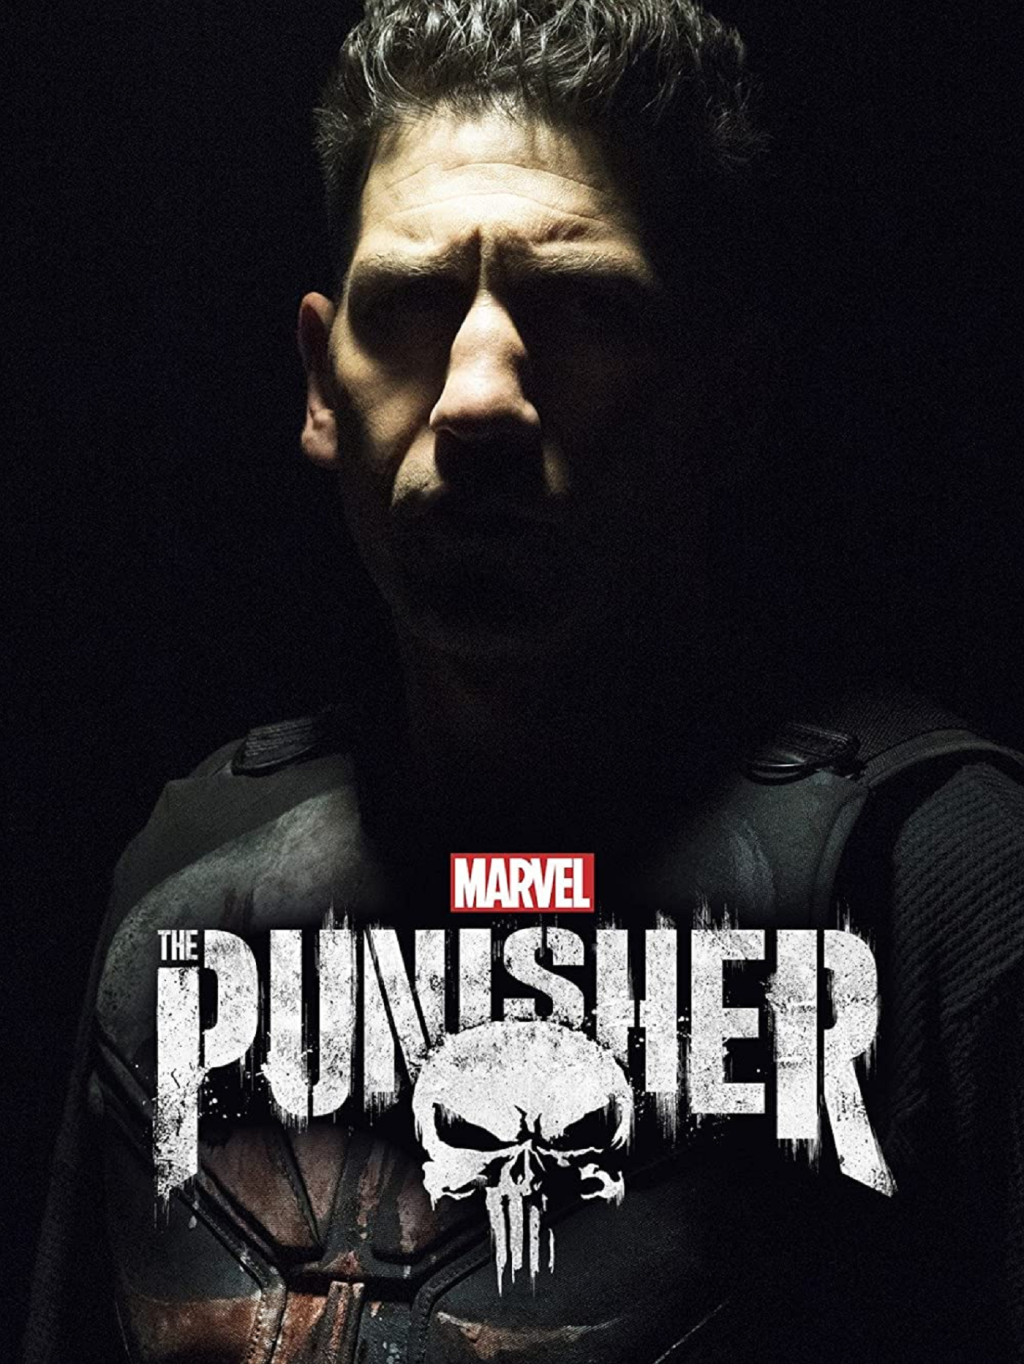 The Punisher (2017) - Mic Wright joins Tim Worthington for a chat about Frank Castle taking out the corrupt in authority and society and knocking over a few bins along the way in It's Good, Except It Sucks.